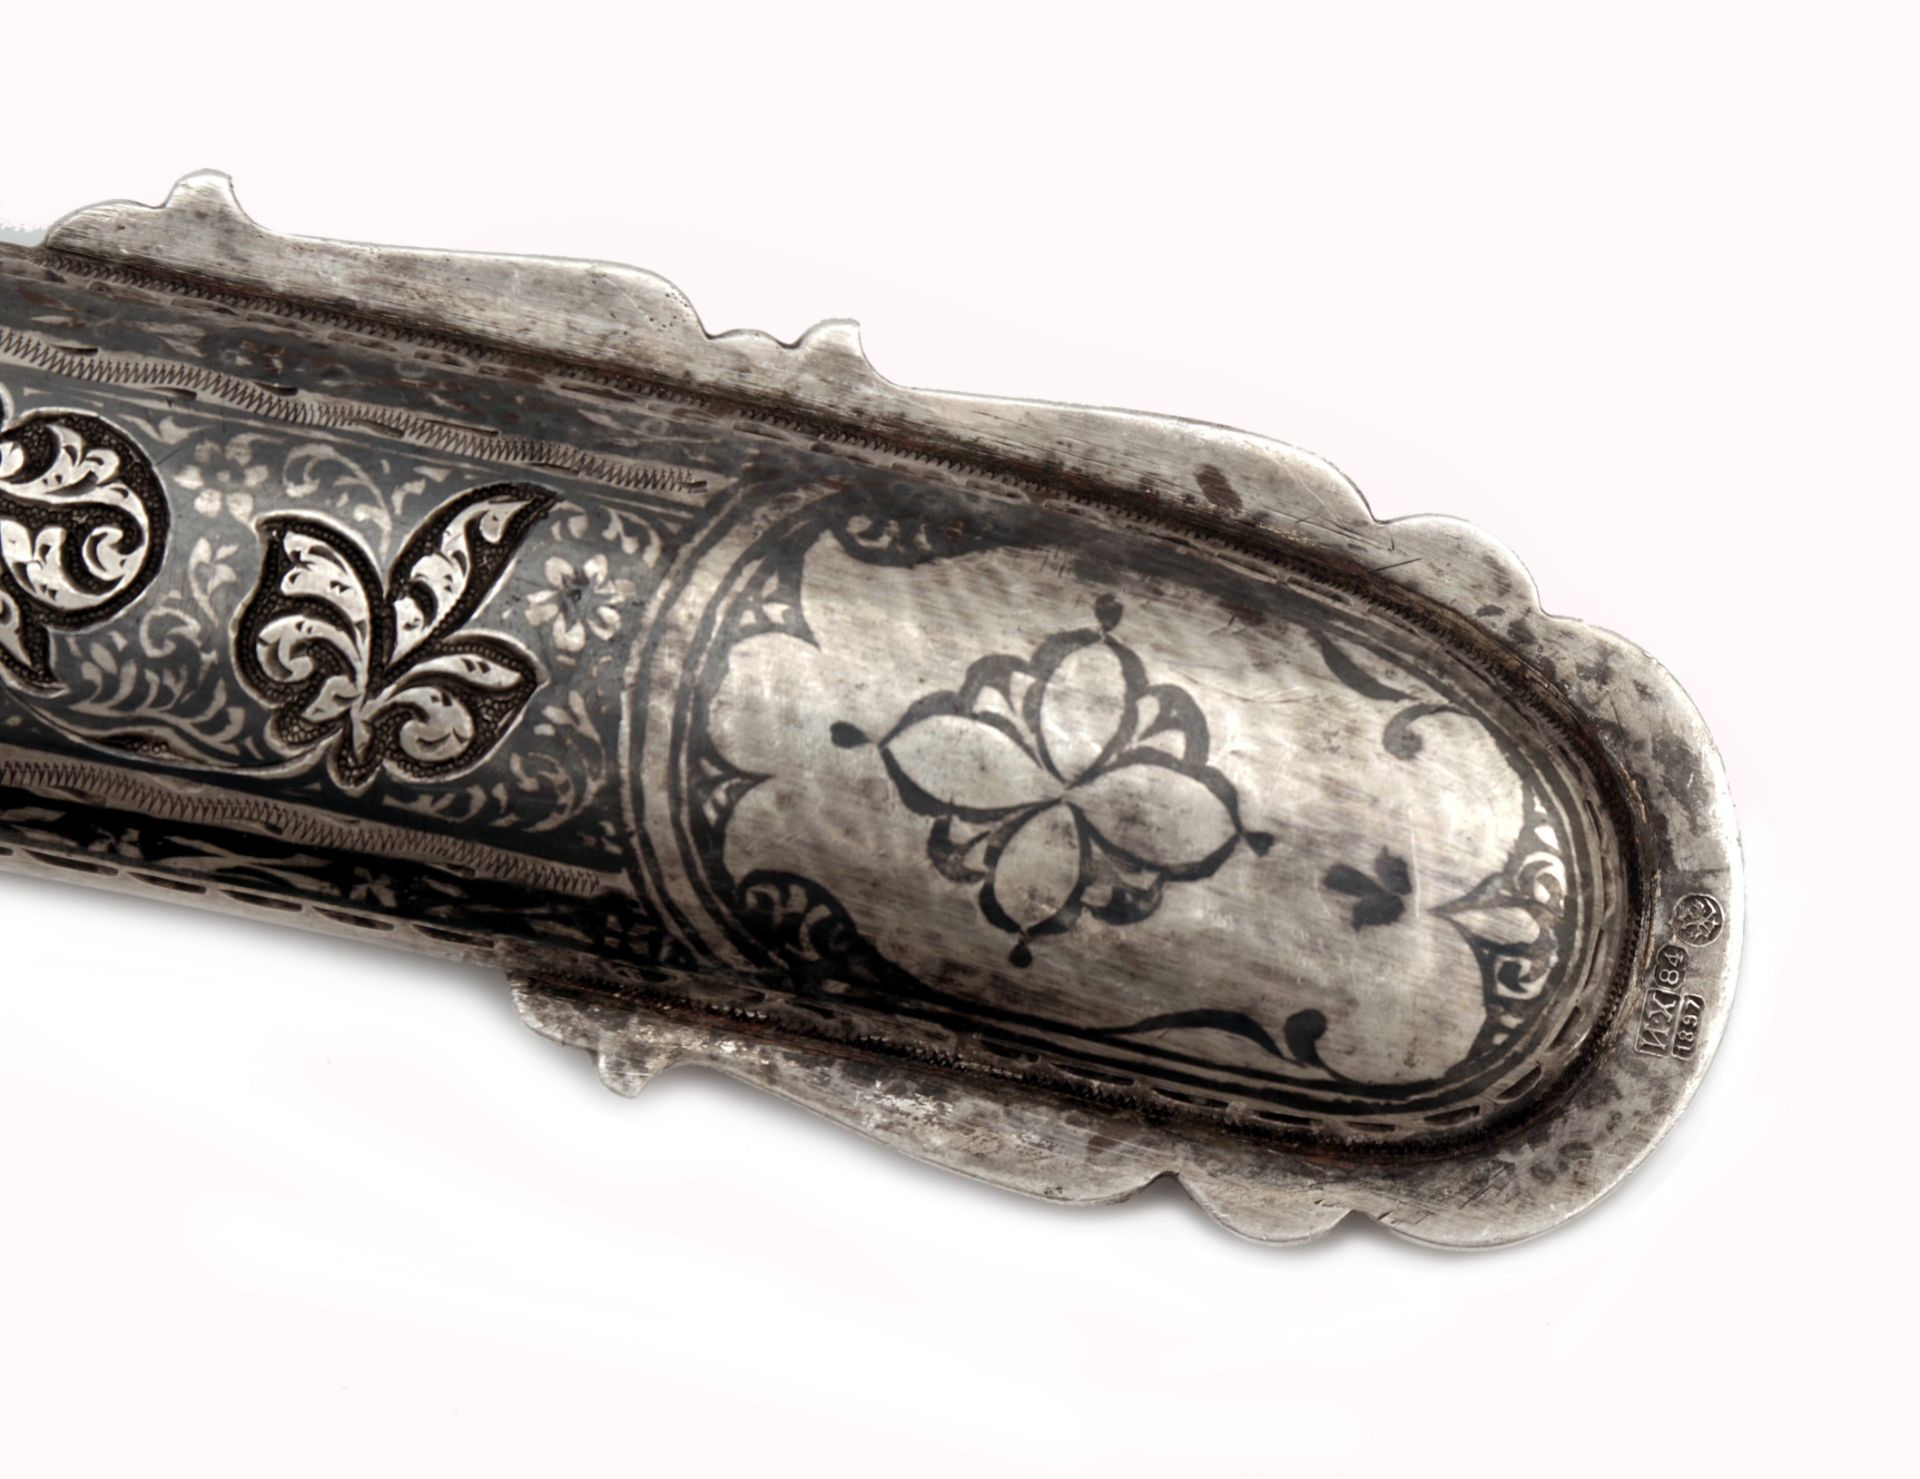 A Fabulous Russian Imperial Presentation Sword in Niello Silver Mounts - Image 2 of 6